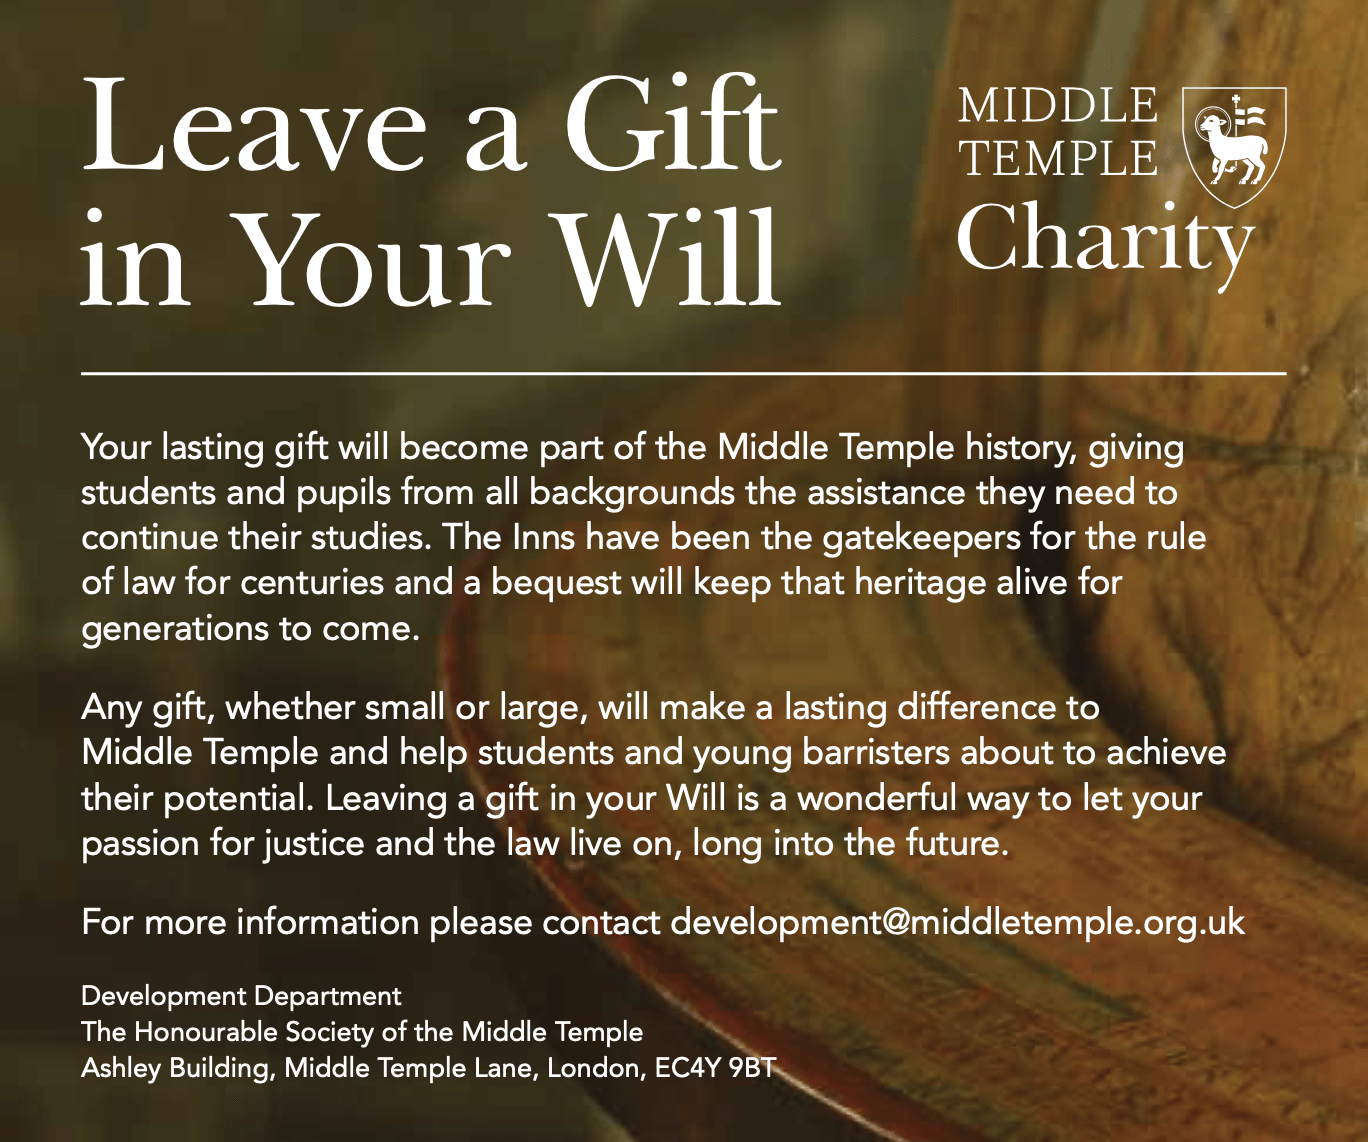 Leave a gift in your will